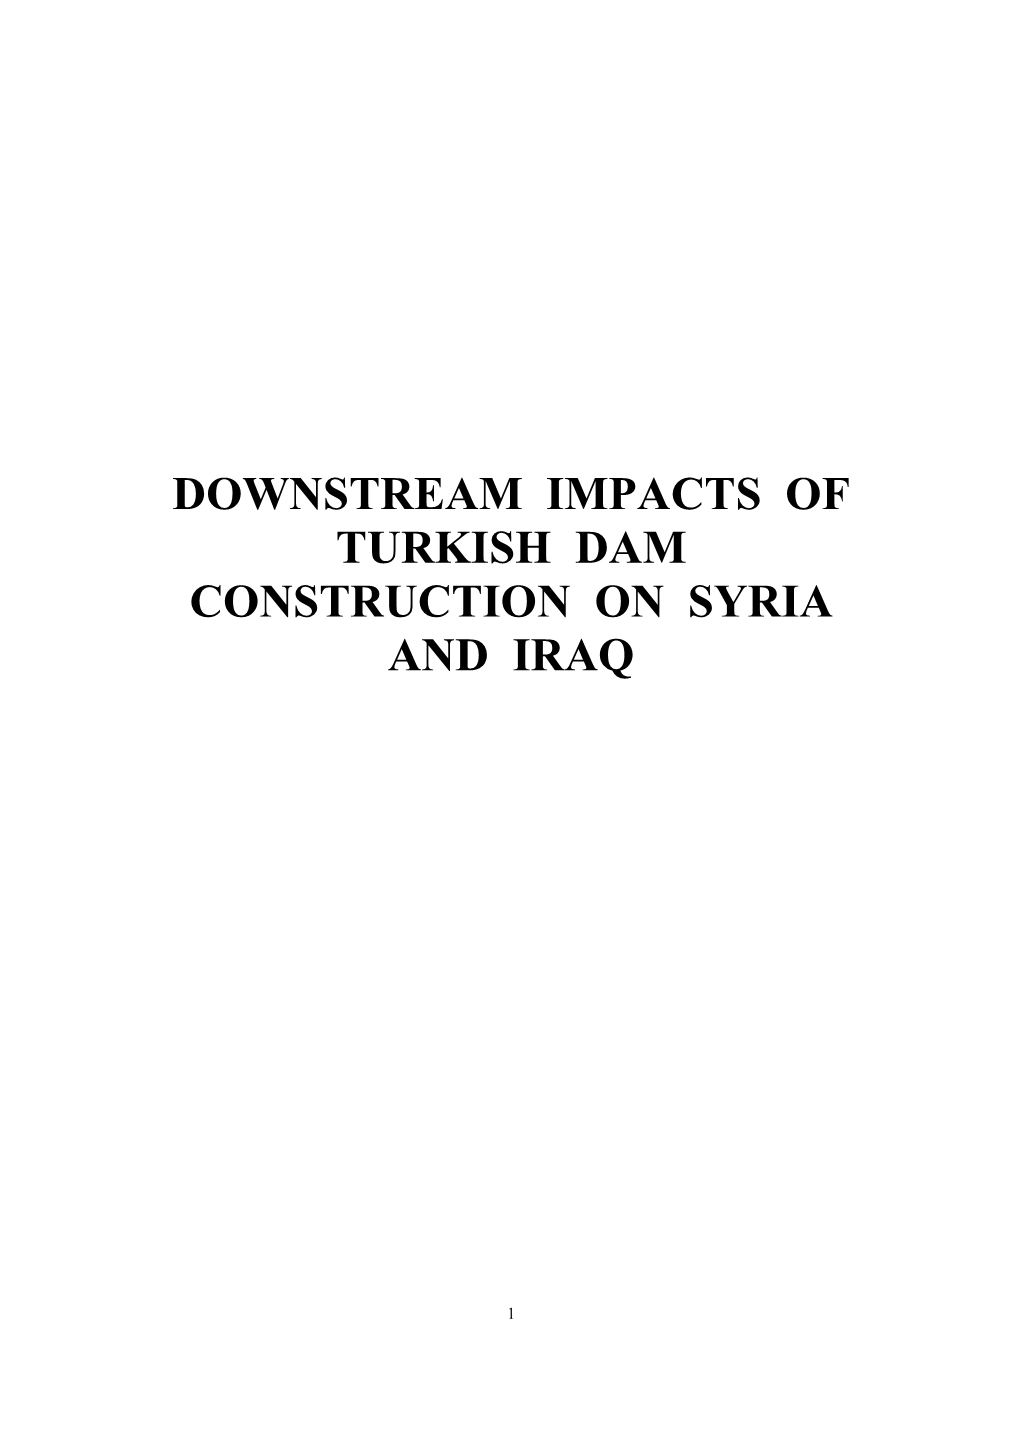 Downstream Impacts of Turkish Dam Construction on Syria and Iraq